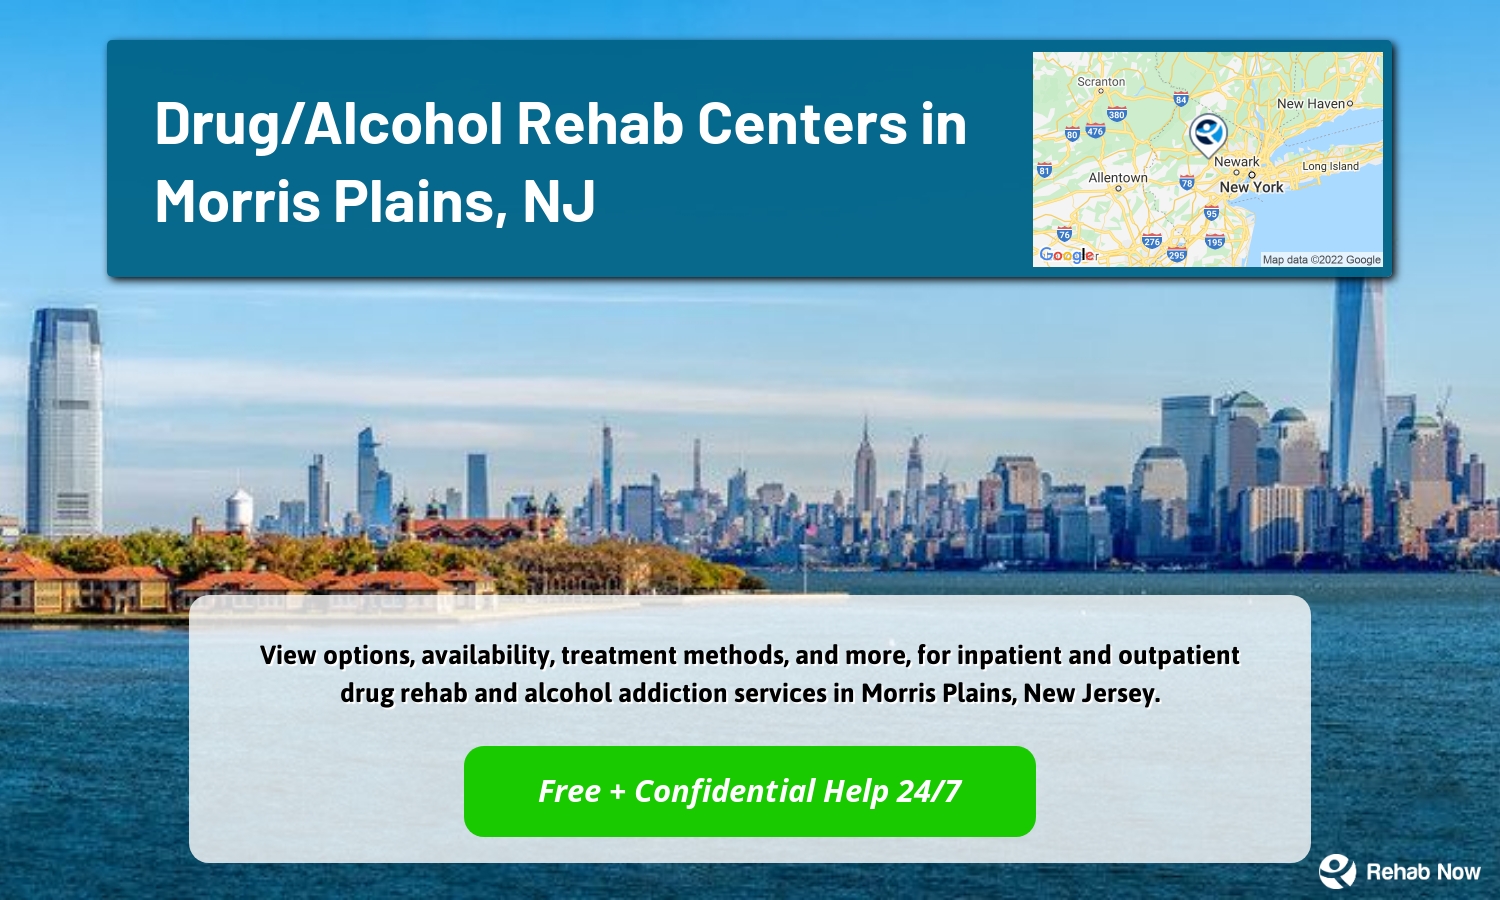 View options, availability, treatment methods, and more, for inpatient and outpatient drug rehab and alcohol addiction services in Morris Plains, New Jersey.